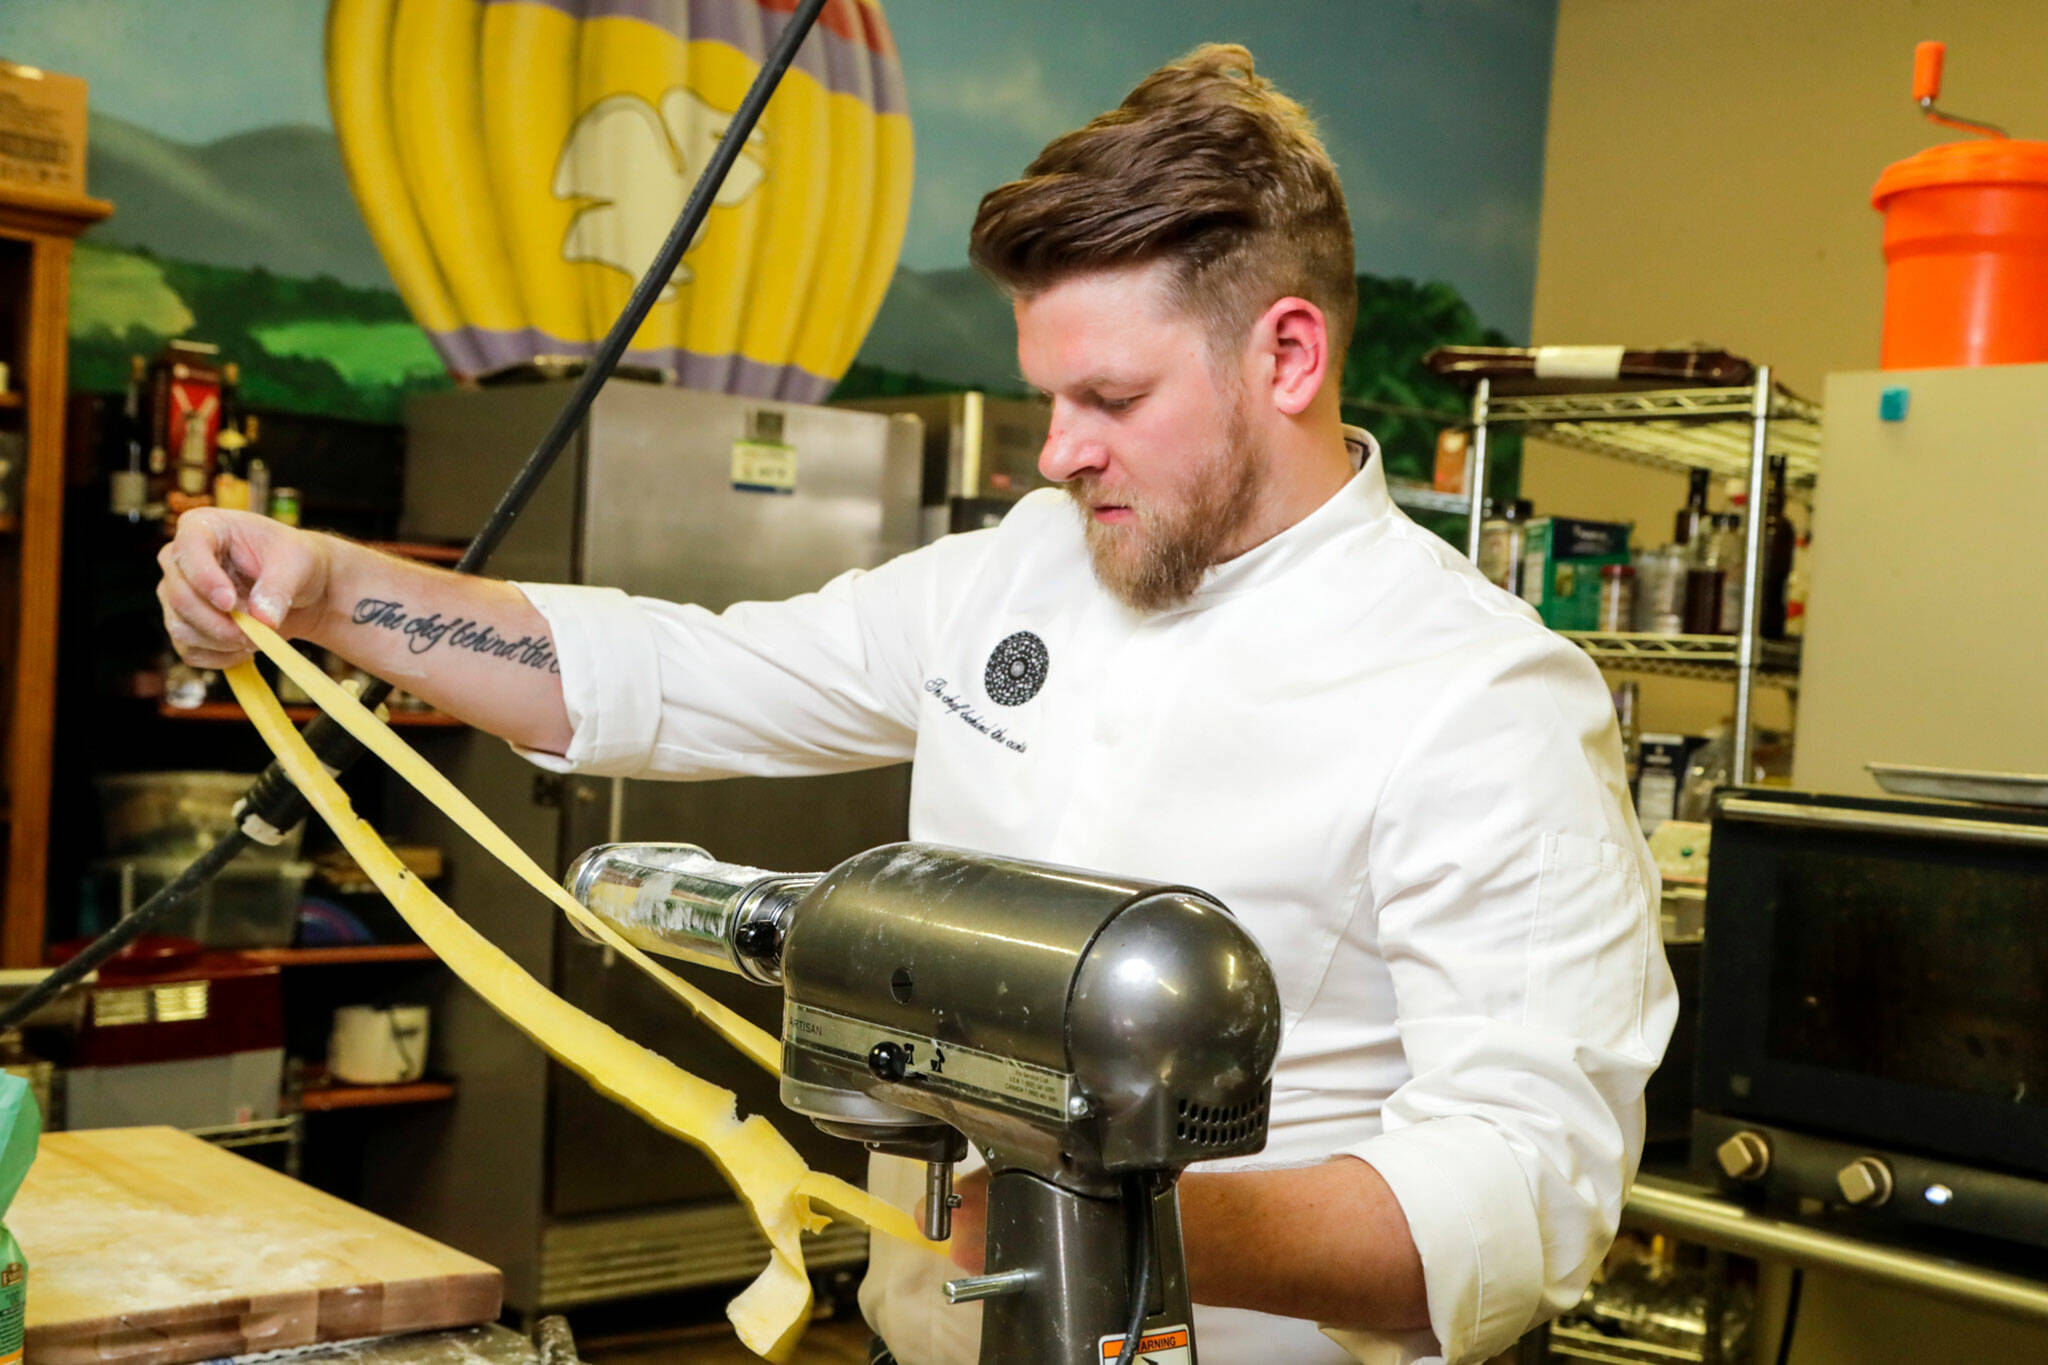 Joel Childs makes pasta at The Chef Behind The Curtain, his restaurant in Snohomish. (Kevin Clark / The Herald)